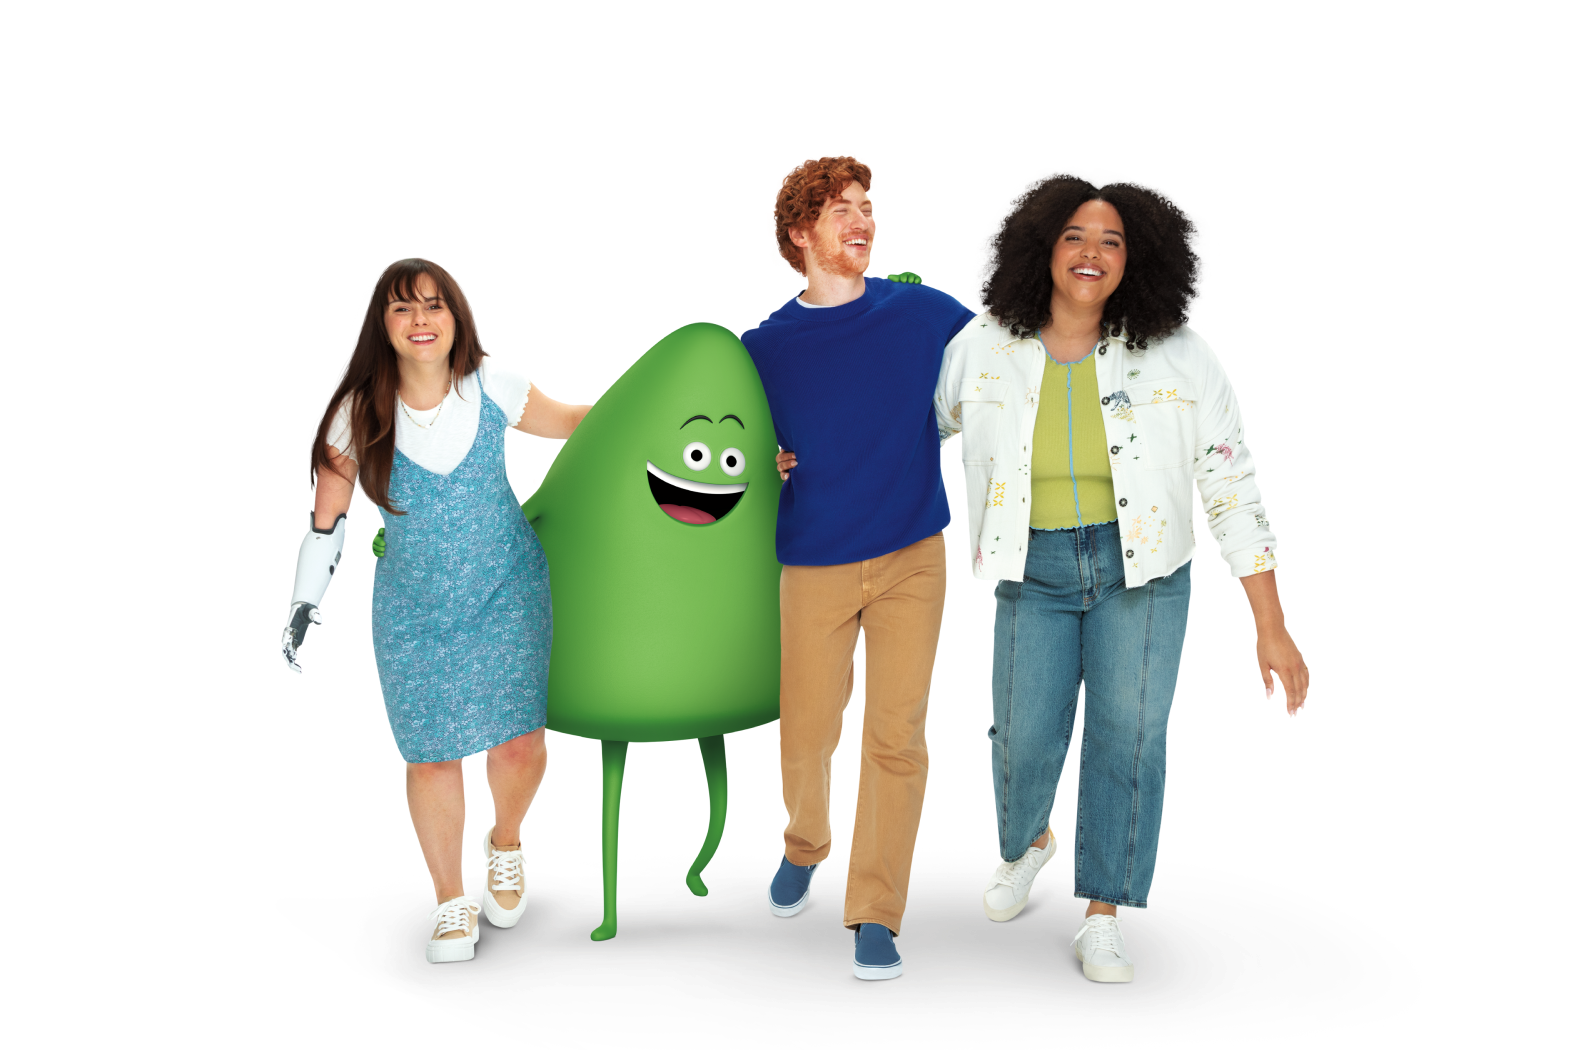 Refer a friend image with Cricket characters